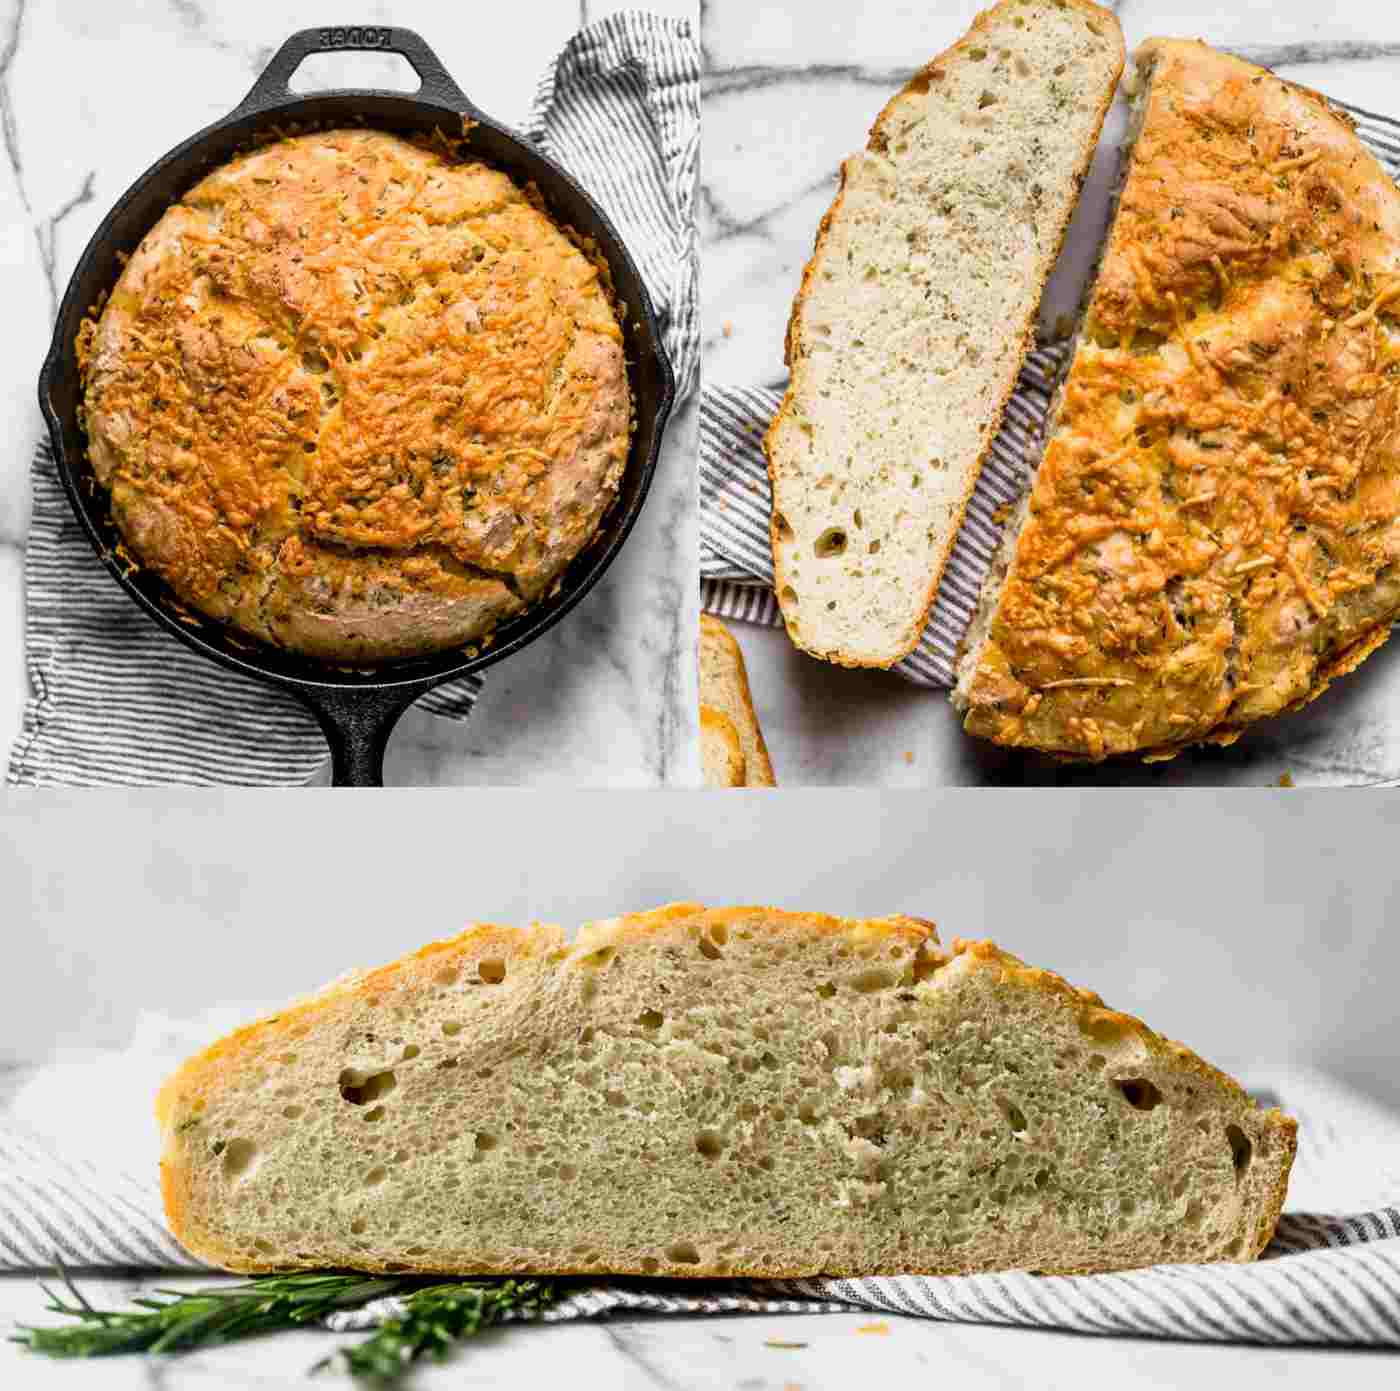 Golden brown baked and airy pancake bread with parmesan